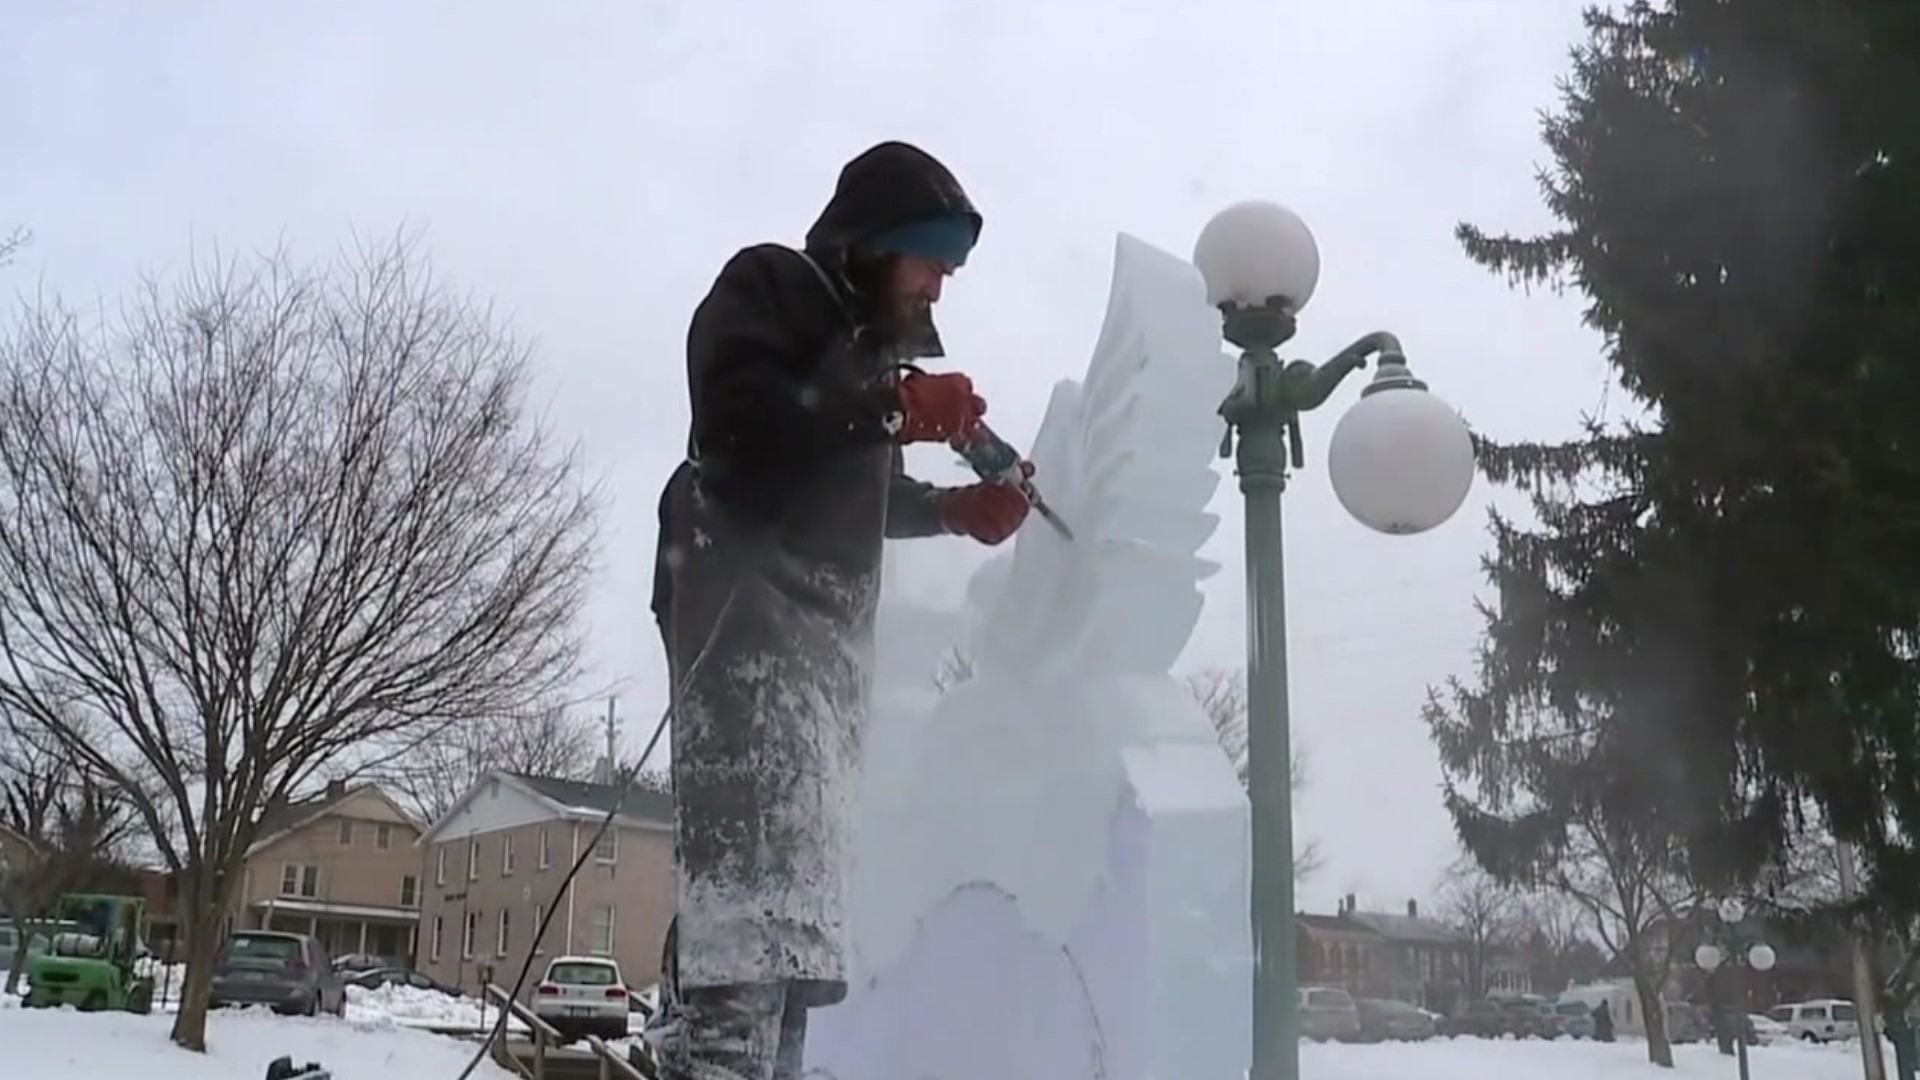 Ice festival returns to Lewisburg this weekend